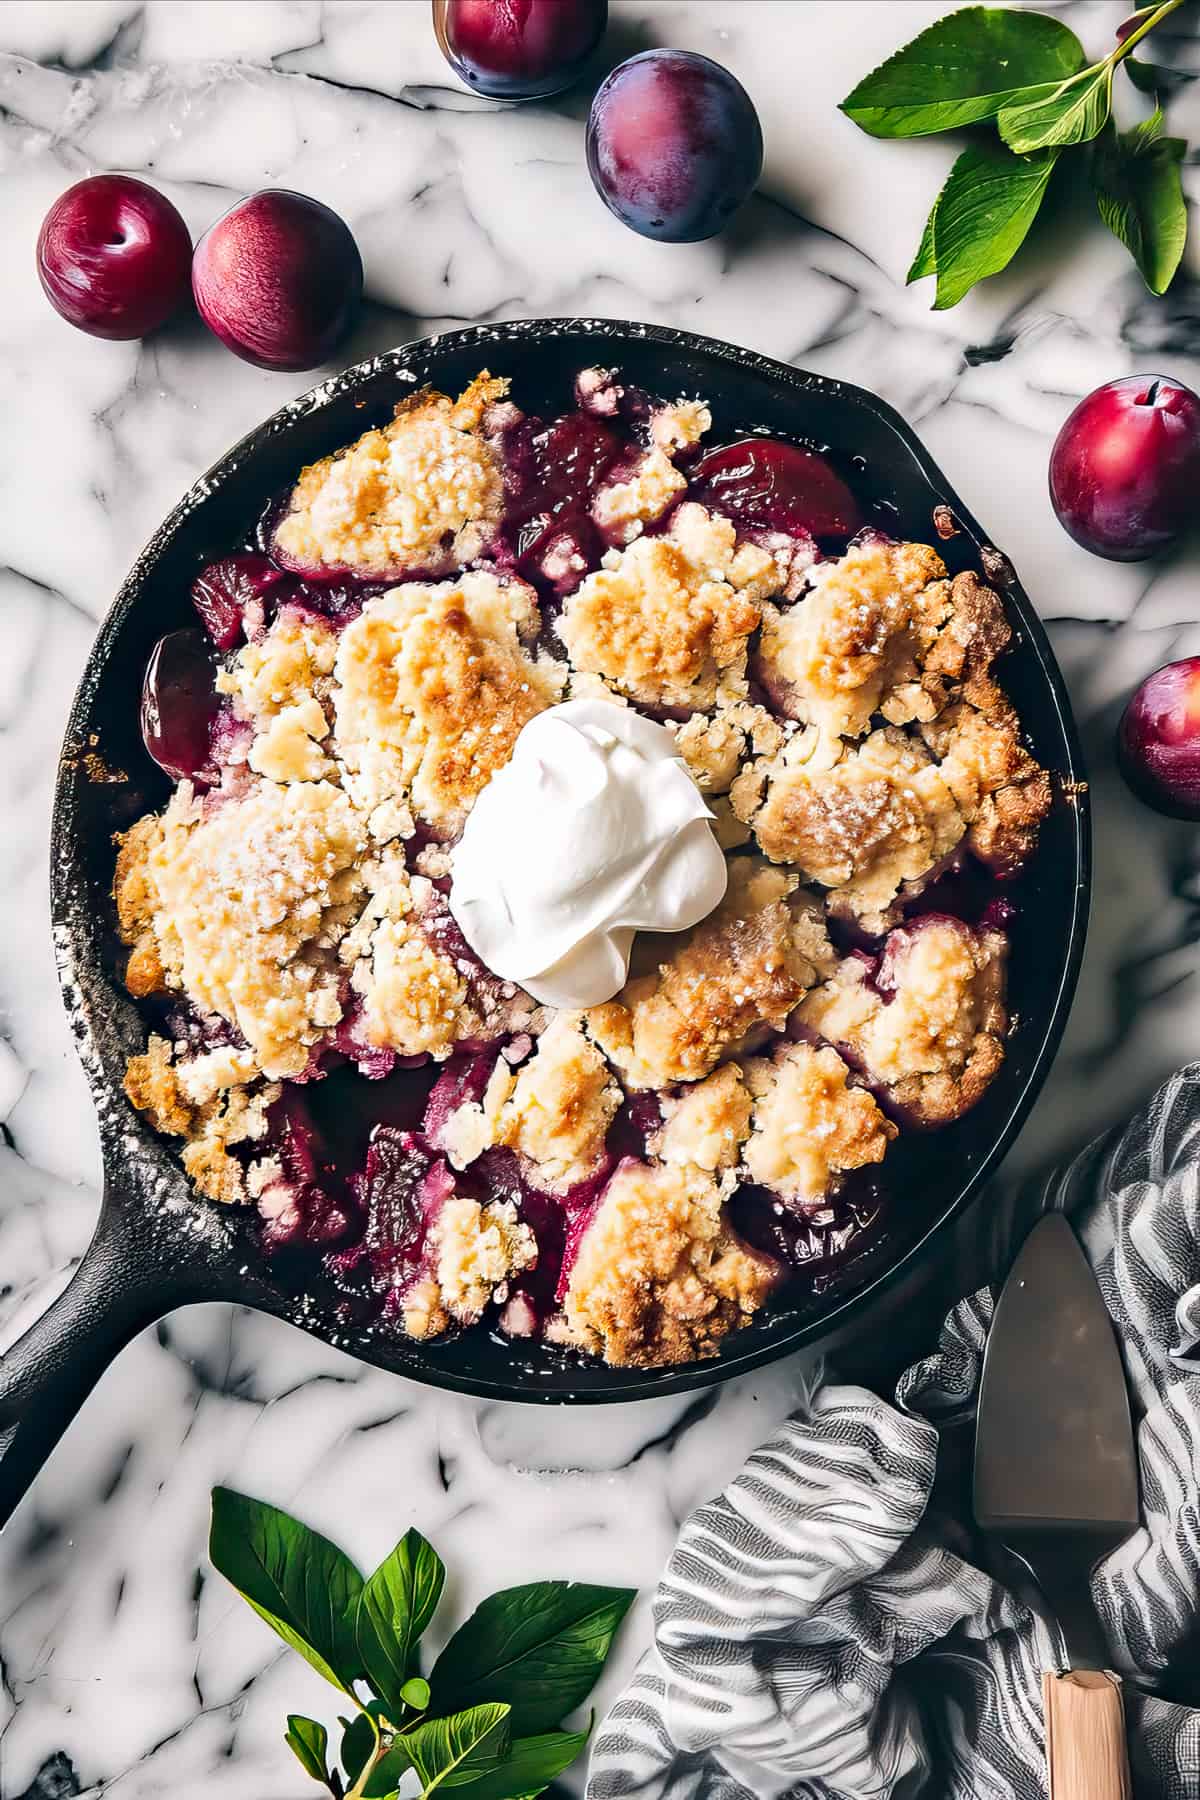 Plum cobbler in a skillet with whipped cream.